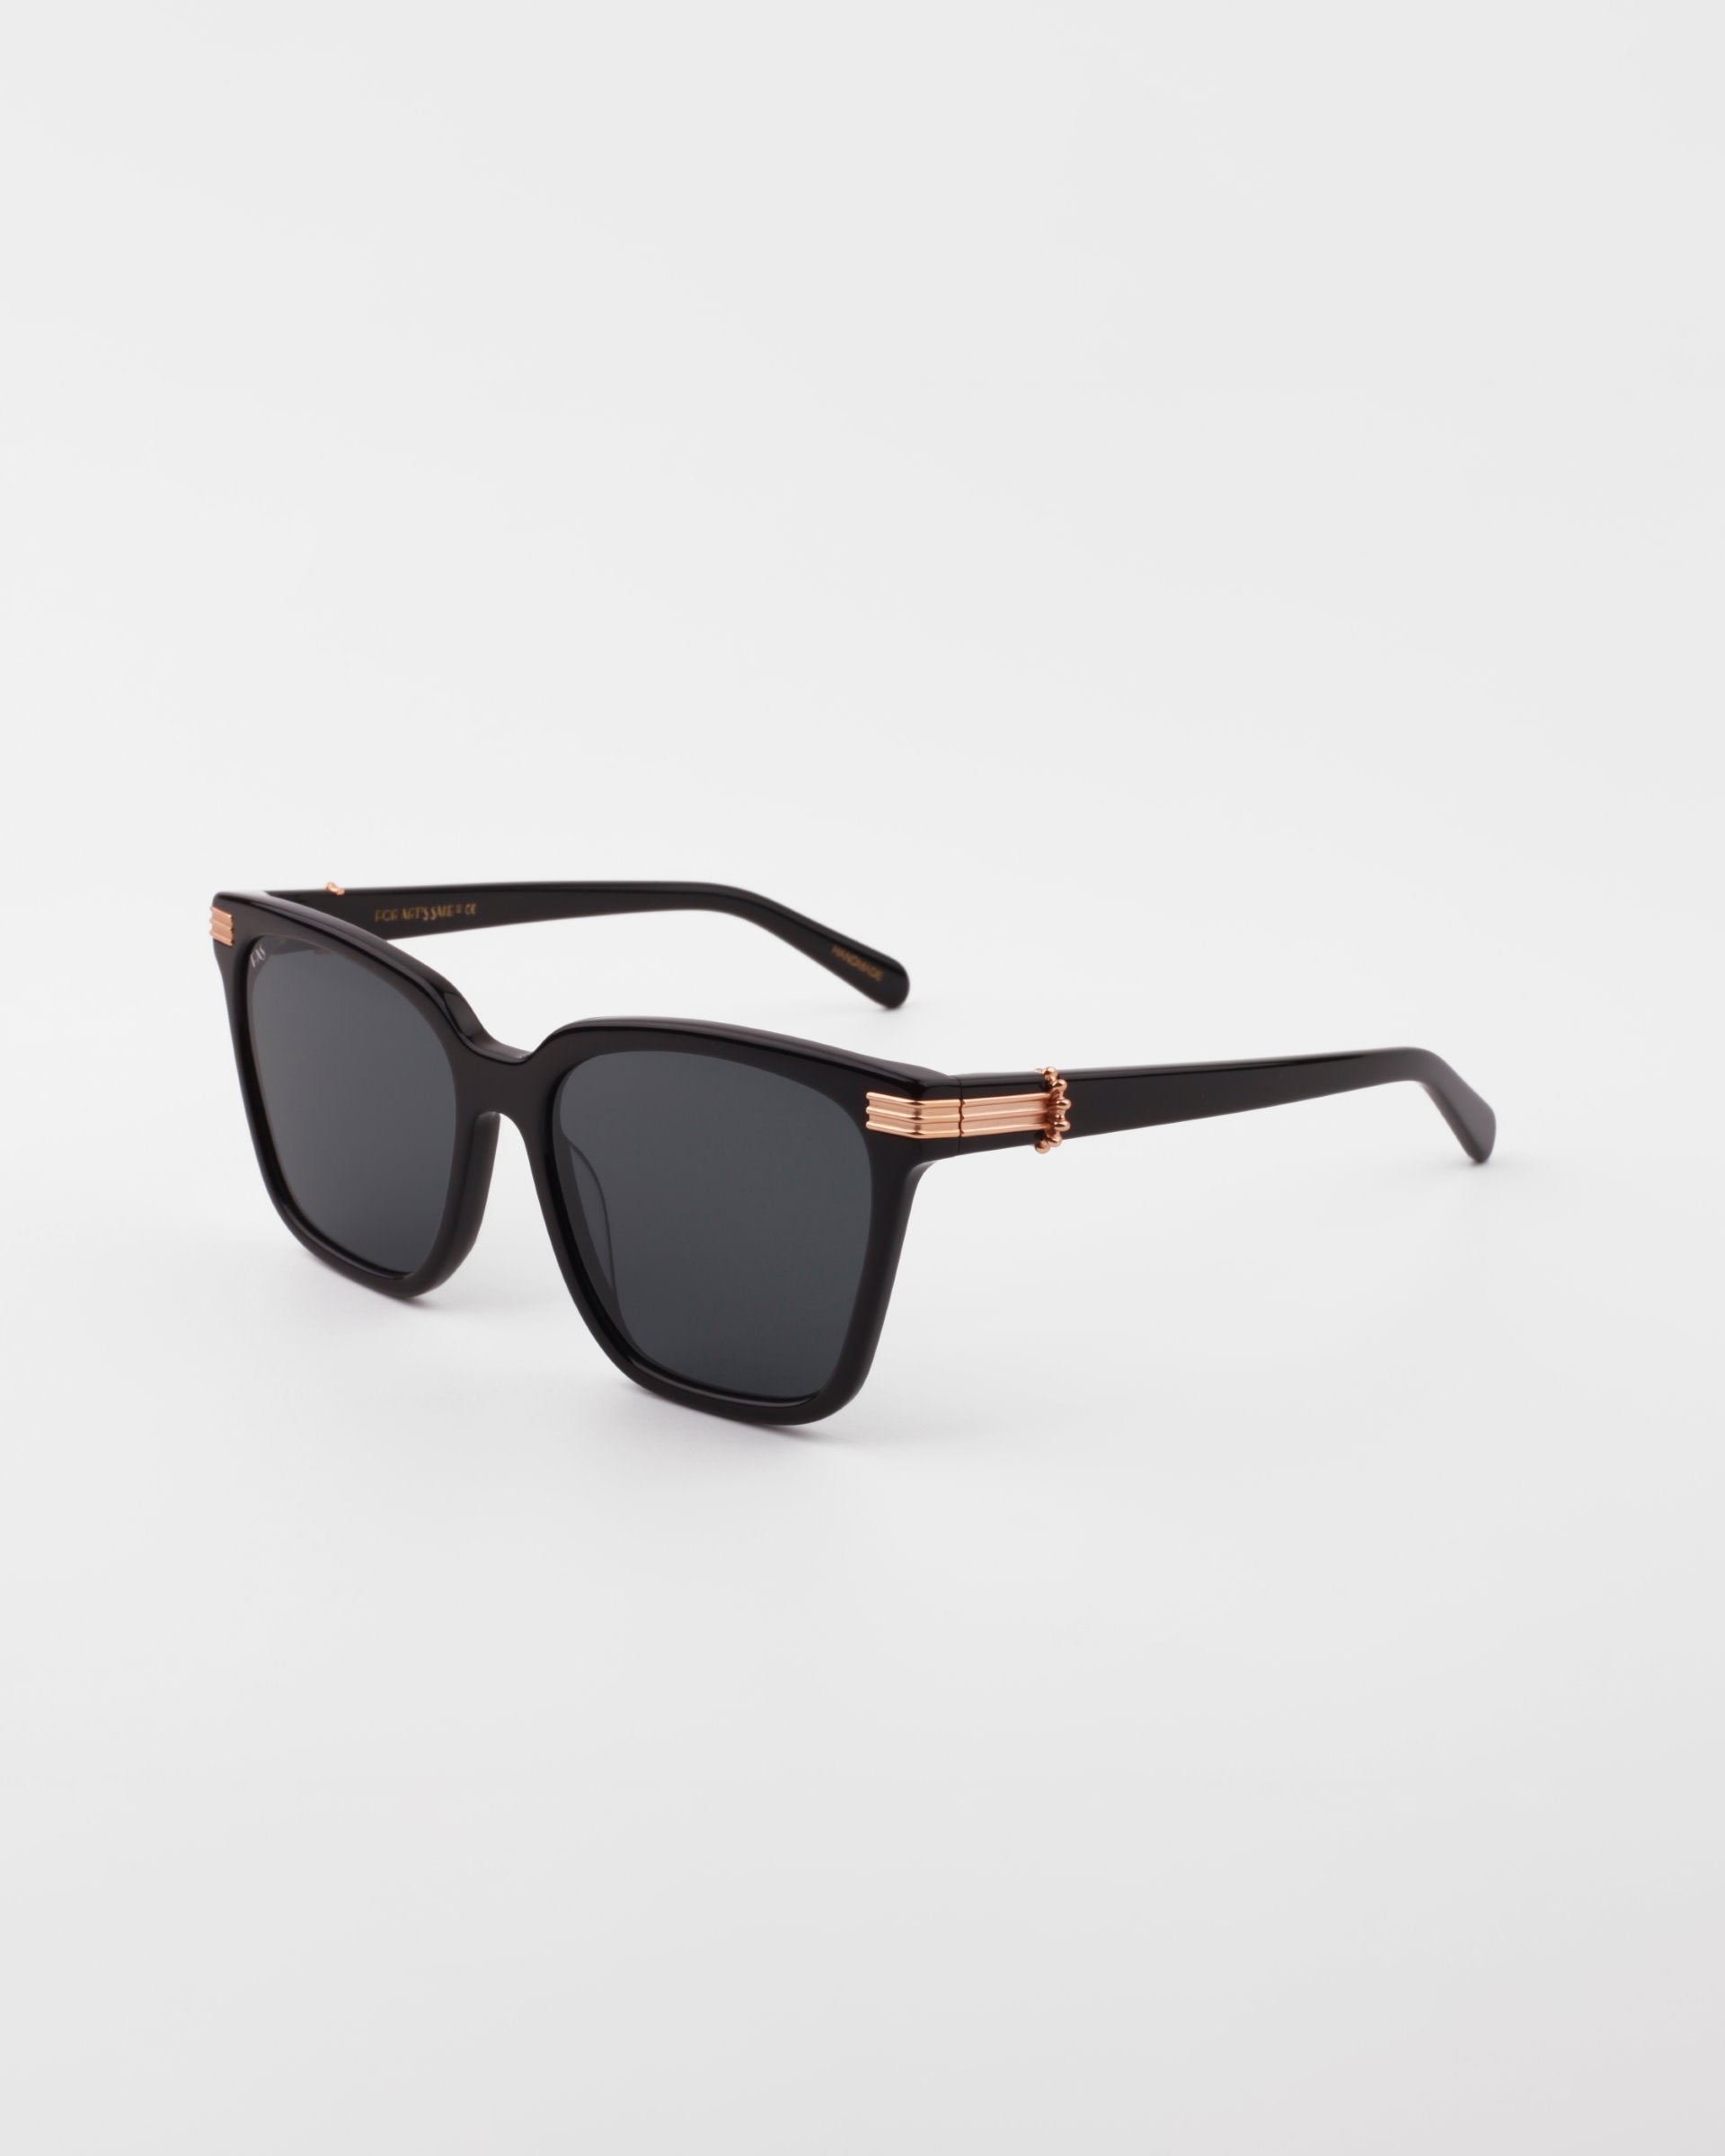 A pair of black rectangular Gaia sunglasses from For Art&#39;s Sake® with UV-protected dark lenses and 18-karat gold-plated accents on the temple hinges, set against a plain white background.